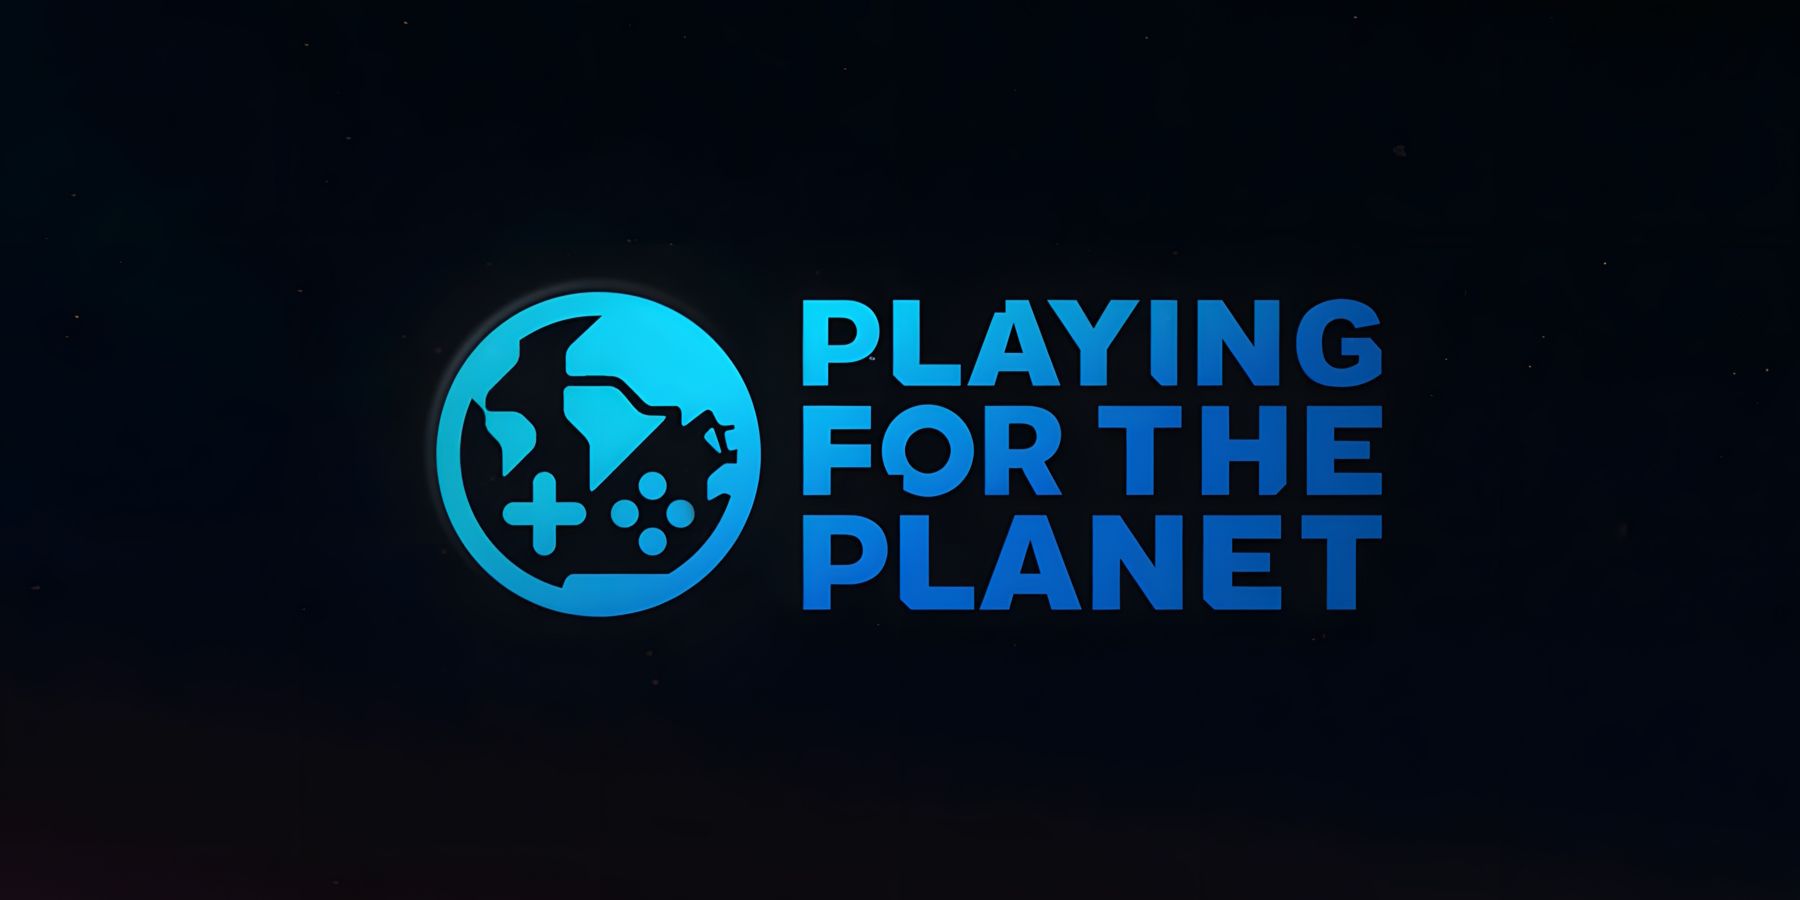 The logo for the UN's Playing for the Planet Alliance